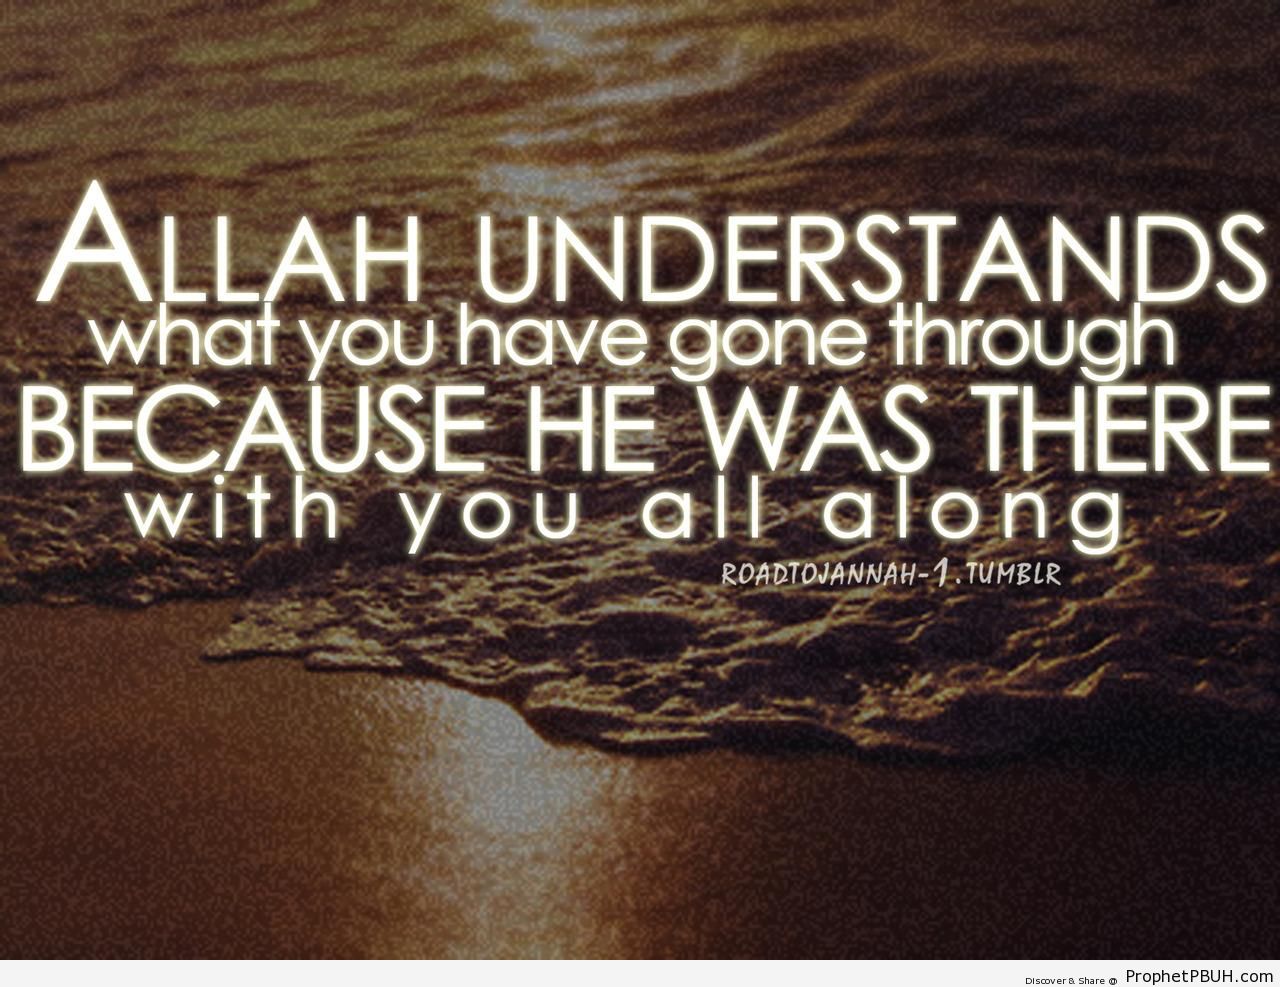 He Was There With You - Islamic Posters -